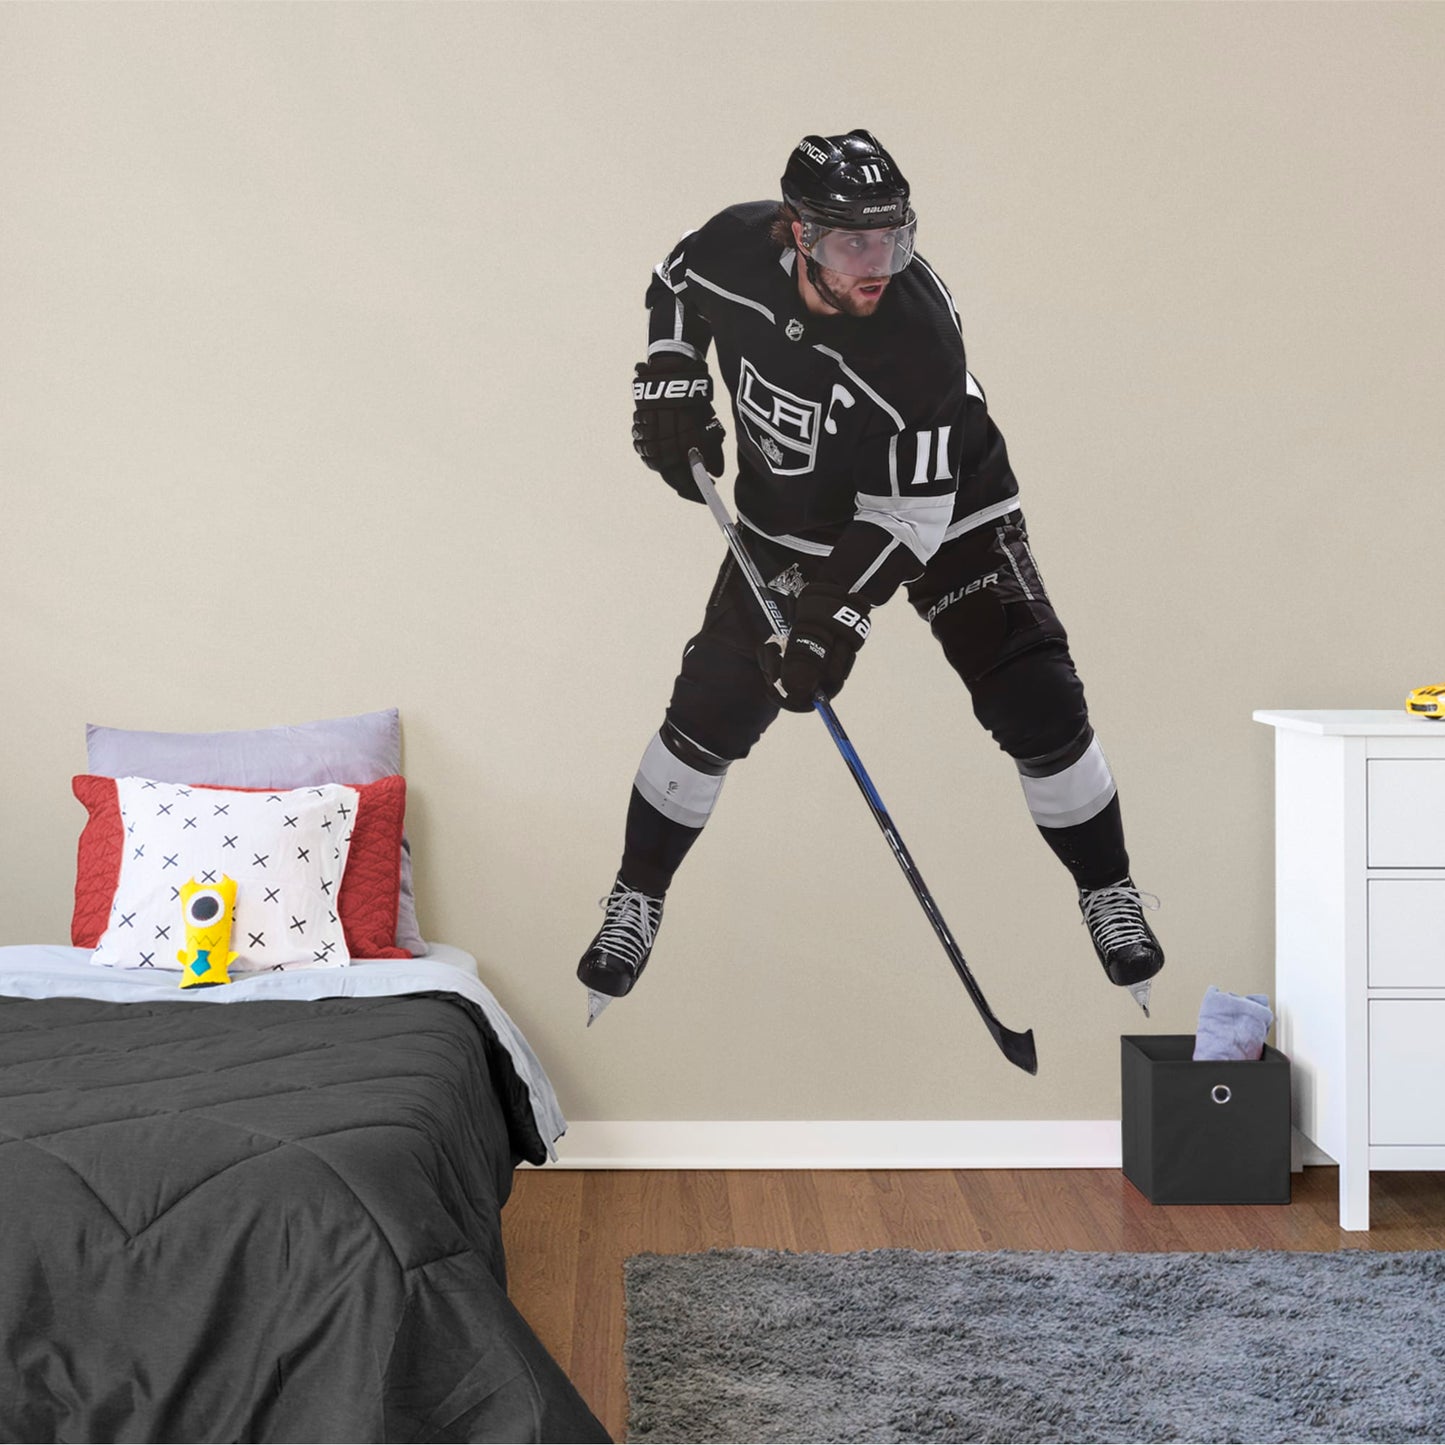 Life-Size Athlete + 2 Decals (46"W x 75"H) NHL fans and Kings fanatics alike love Anze Kopitar, the clutch captain from Los Angeles, and now you can bring his skill to life in your own home! Seen here in his home uniform in action on the ice, this durable, bold, and removable wall decal will make the perfect addition to your bedroom, office, fan room, or any spot in your house! Let's Go Kings!